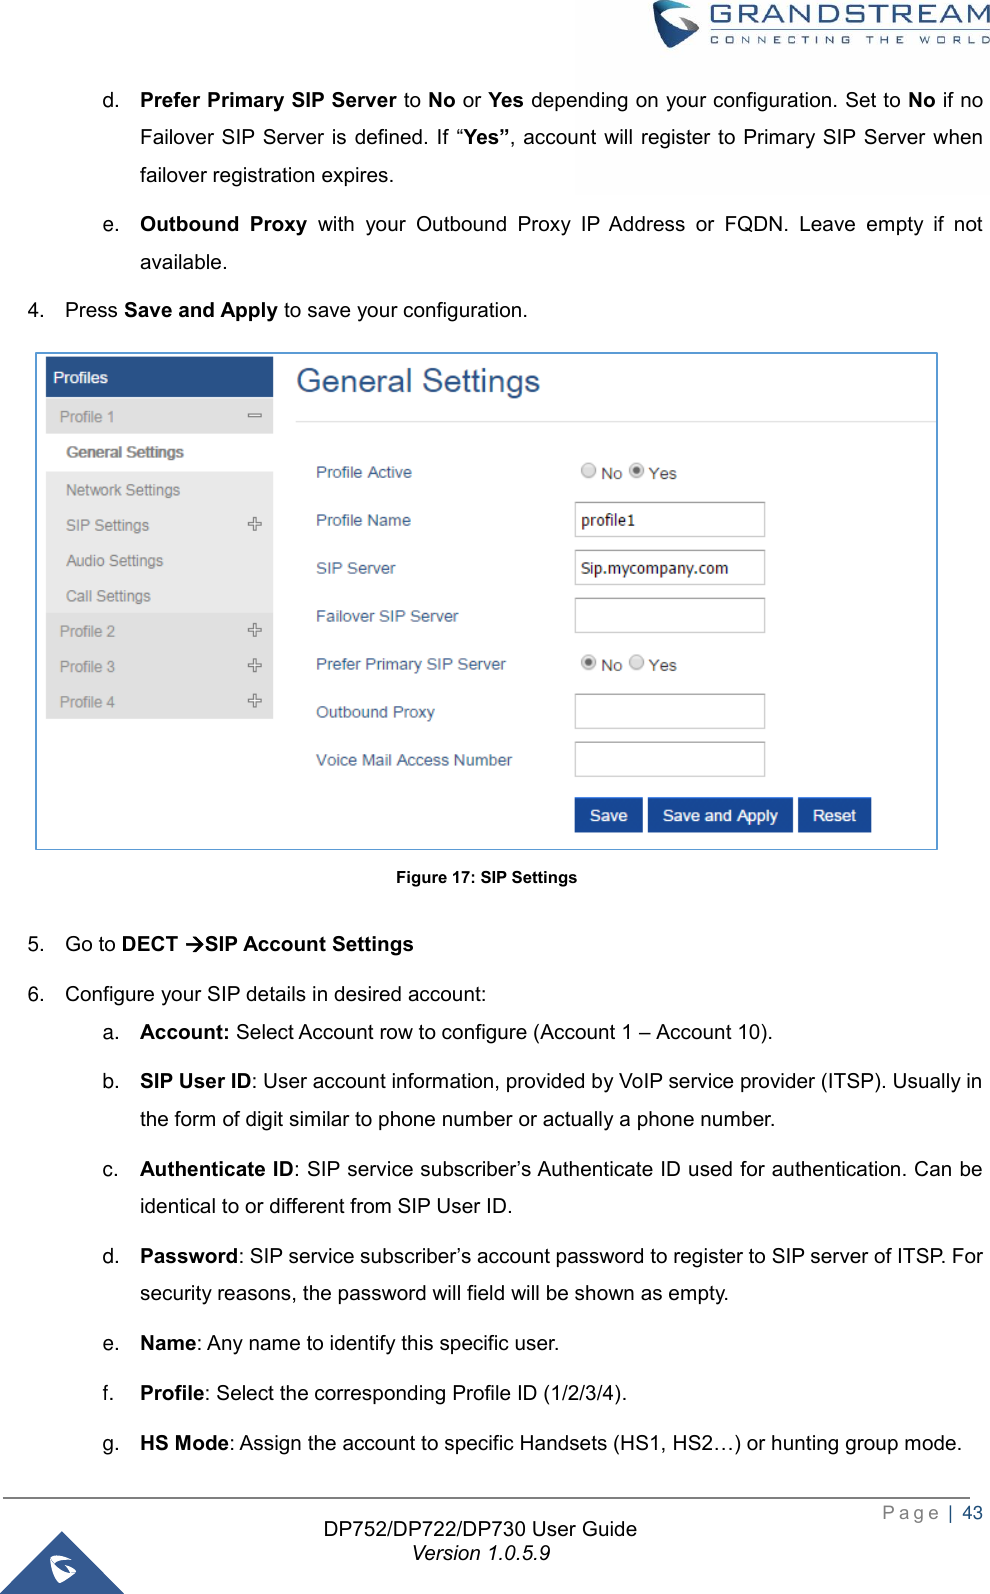  P a g e  |  43   DP752/DP722/DP730 User Guide Version 1.0.5.9   d. Prefer Primary SIP Server to No or Yes depending on your configuration. Set to No if no Failover SIP Server is  defined. If  “Yes”, account will  register to Primary SIP Server  when failover registration expires. e. Outbound  Proxy  with  your  Outbound  Proxy  IP  Address  or  FQDN.  Leave  empty  if  not available. 4. Press Save and Apply to save your configuration.  Figure 17: SIP Settings  5. Go to DECT →SIP Account Settings 6. Configure your SIP details in desired account: a. Account: Select Account row to configure (Account 1 – Account 10). b. SIP User ID: User account information, provided by VoIP service provider (ITSP). Usually in the form of digit similar to phone number or actually a phone number. c. Authenticate ID: SIP service subscriber’s Authenticate ID used for authentication. Can be identical to or different from SIP User ID. d. Password: SIP service subscriber’s account password to register to SIP server of ITSP. For security reasons, the password will field will be shown as empty. e. Name: Any name to identify this specific user. f. Profile: Select the corresponding Profile ID (1/2/3/4). g. HS Mode: Assign the account to specific Handsets (HS1, HS2…) or hunting group mode. 